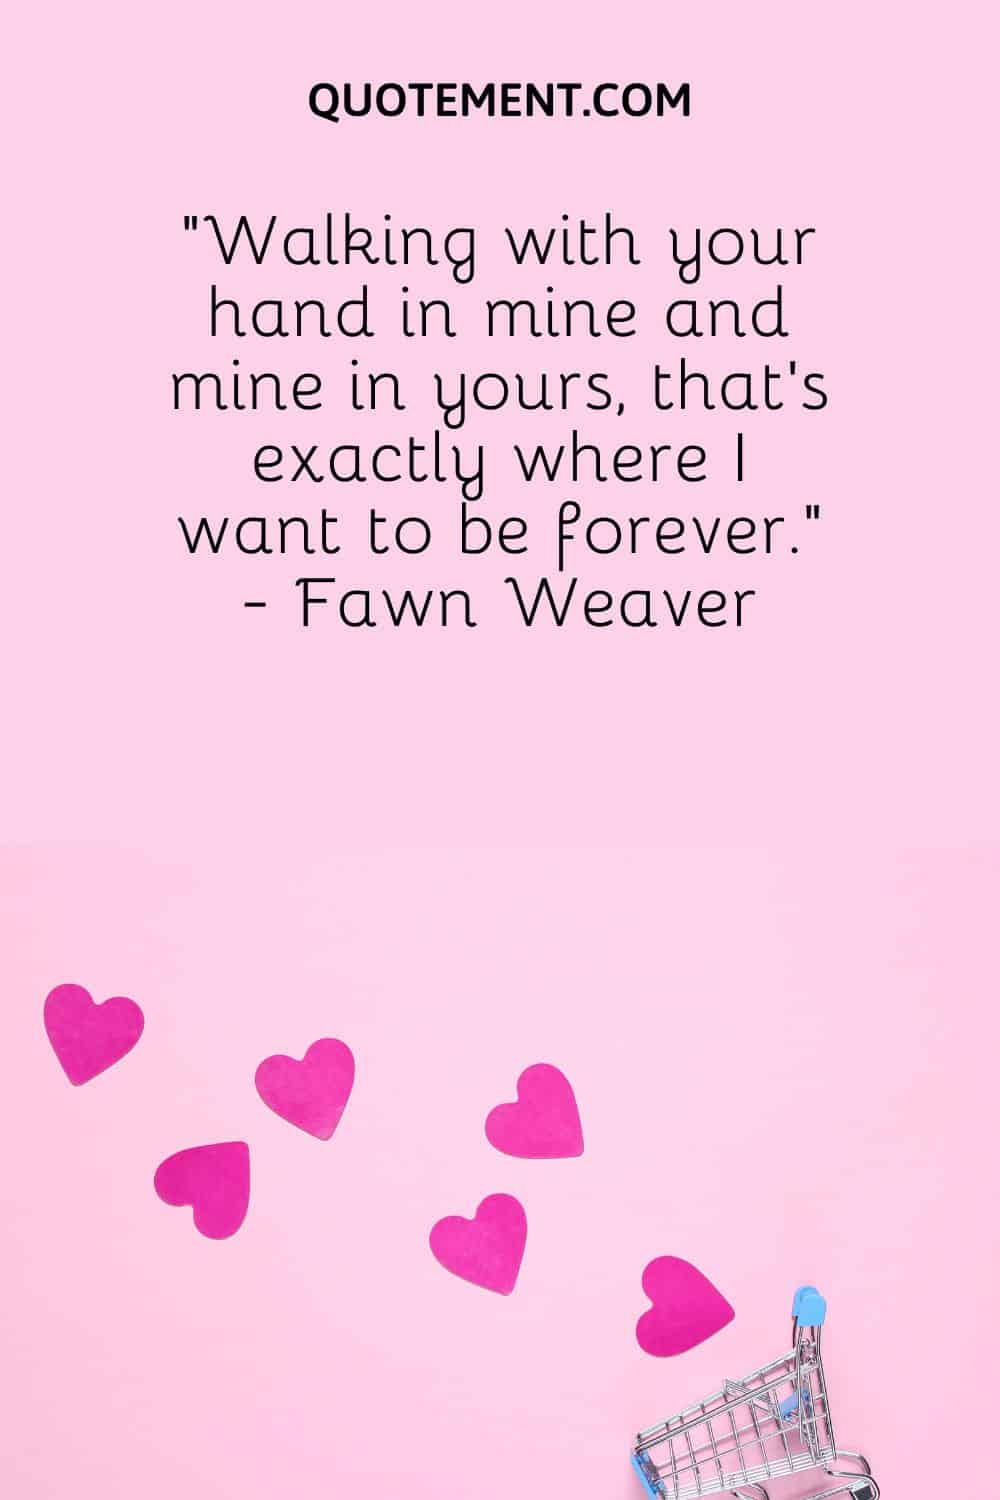 “Walking with your hand in mine and mine in yours, that’s exactly where I want to be forever.” - Fawn Weaver